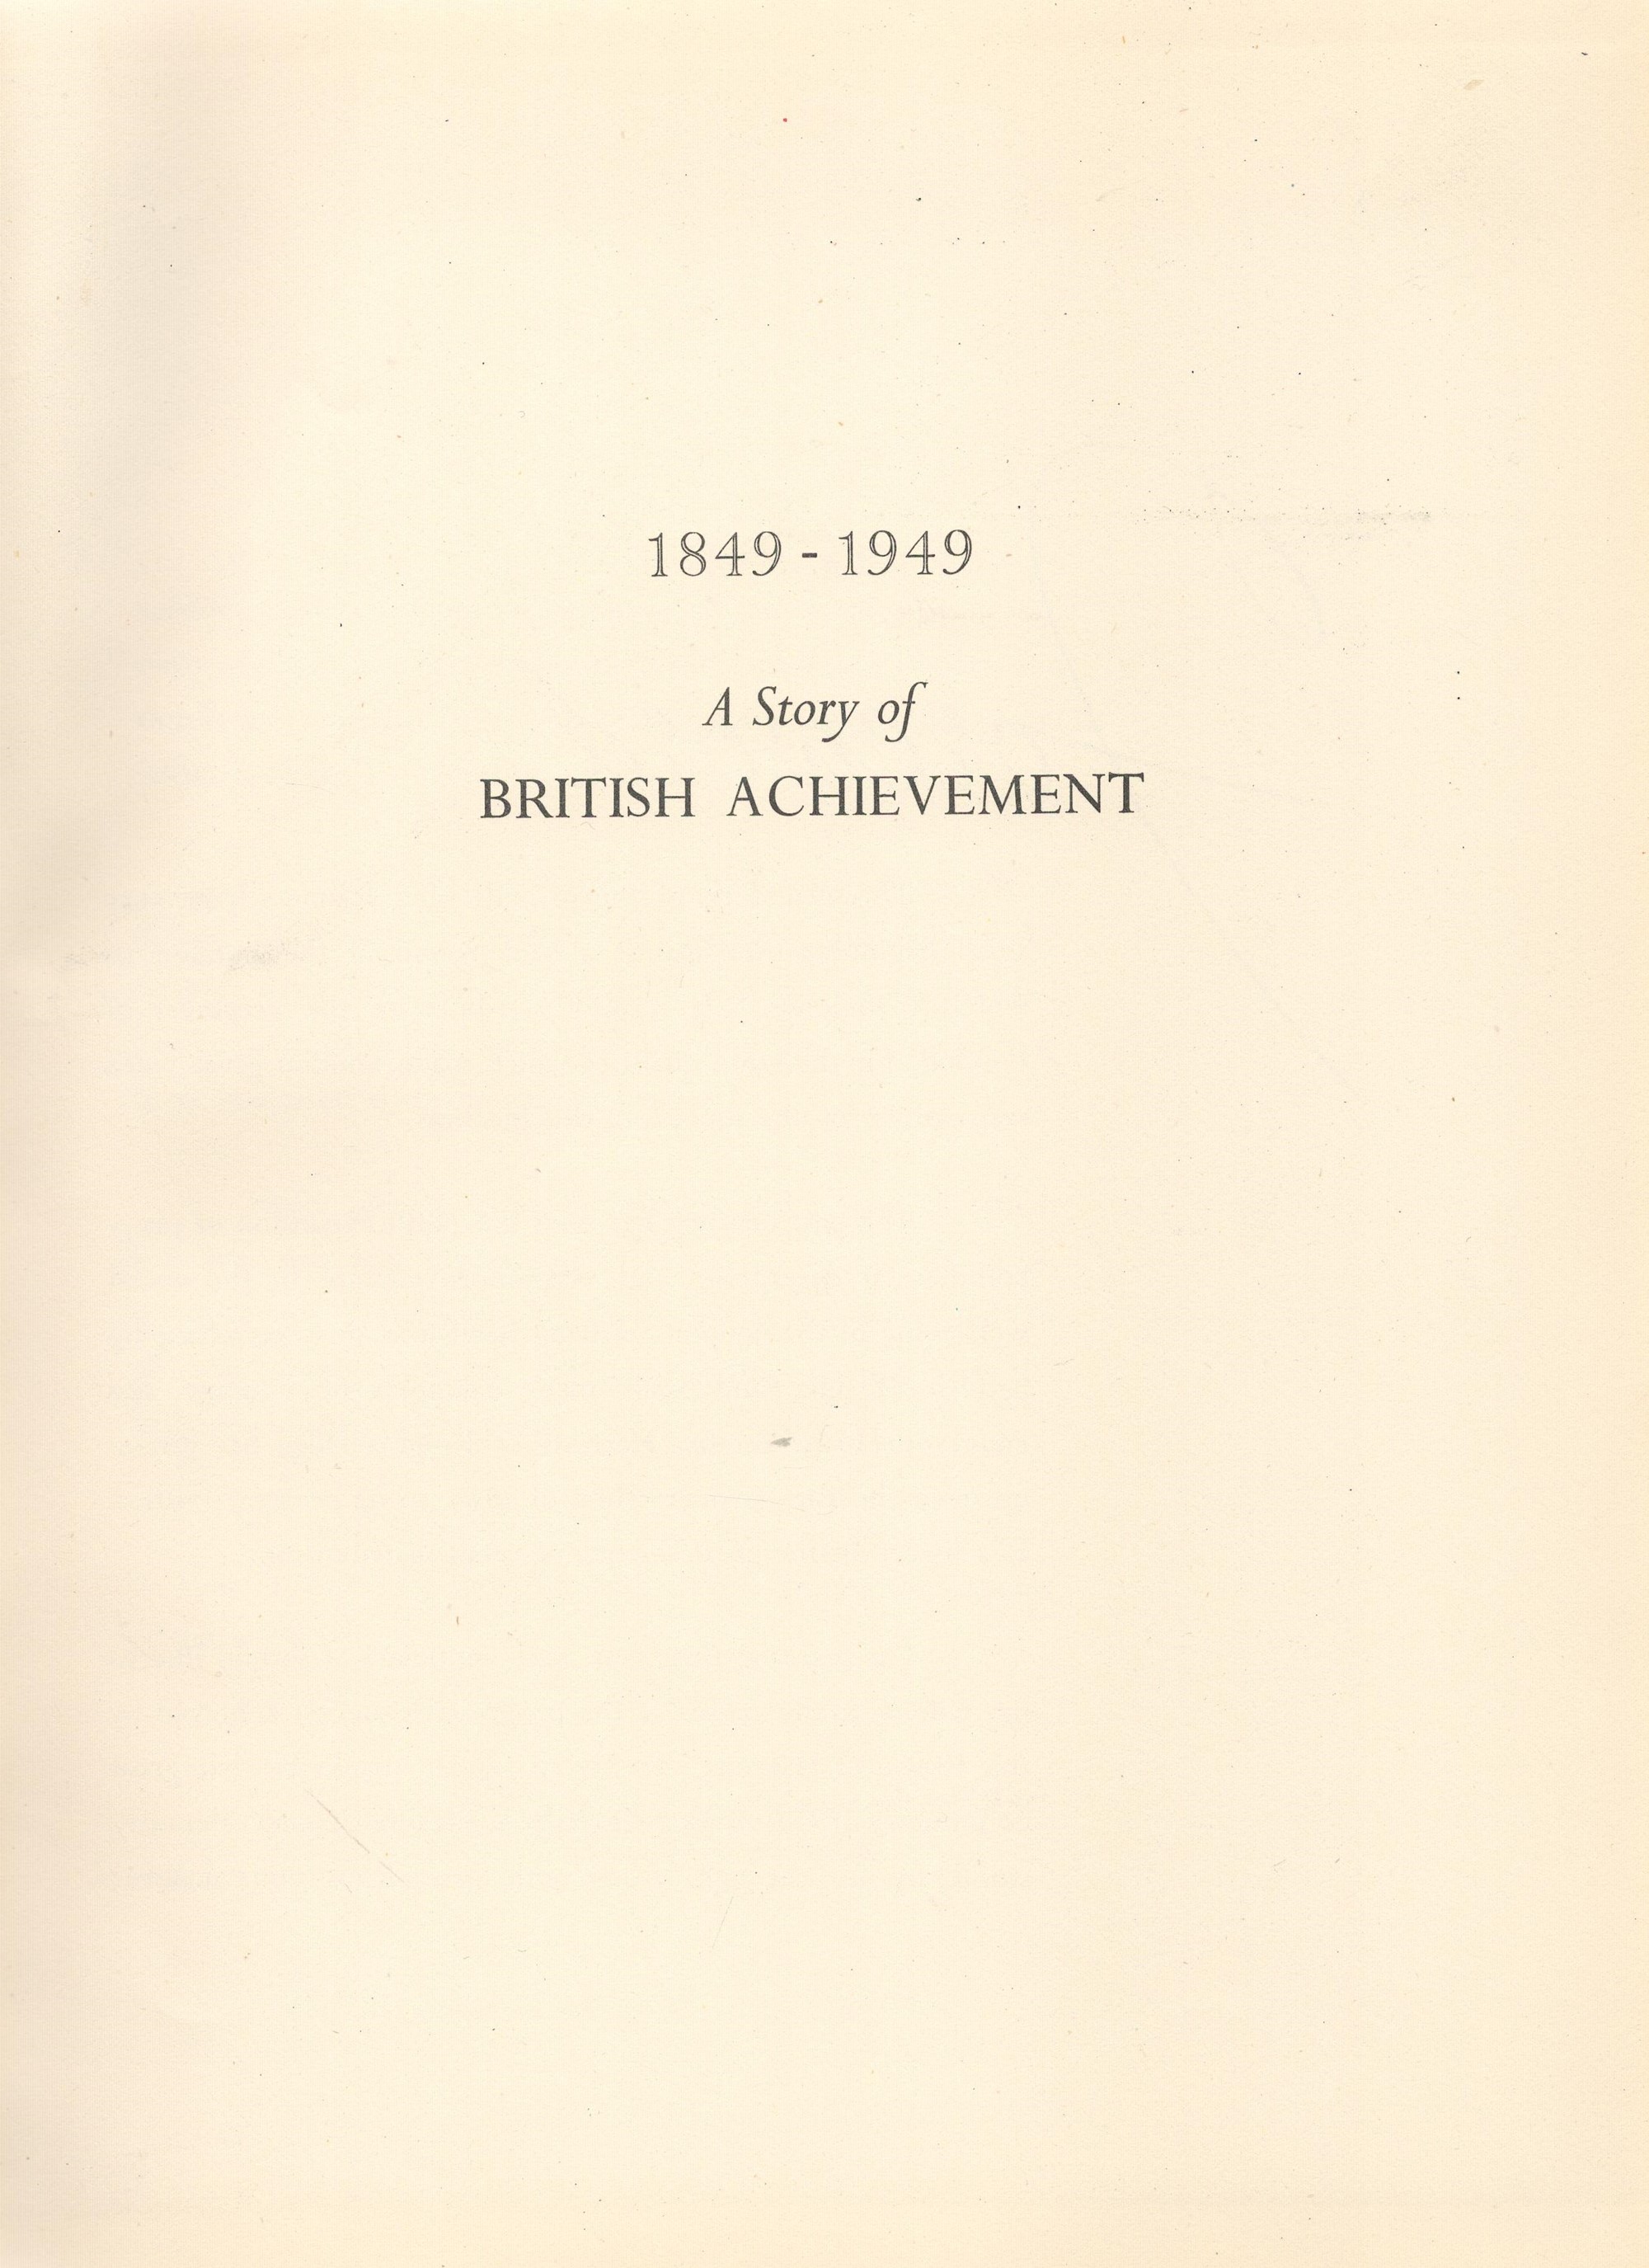 A Story of British Achievement 1849 1949 Hardback Book date and edition unknown publisher unknown - Image 3 of 4